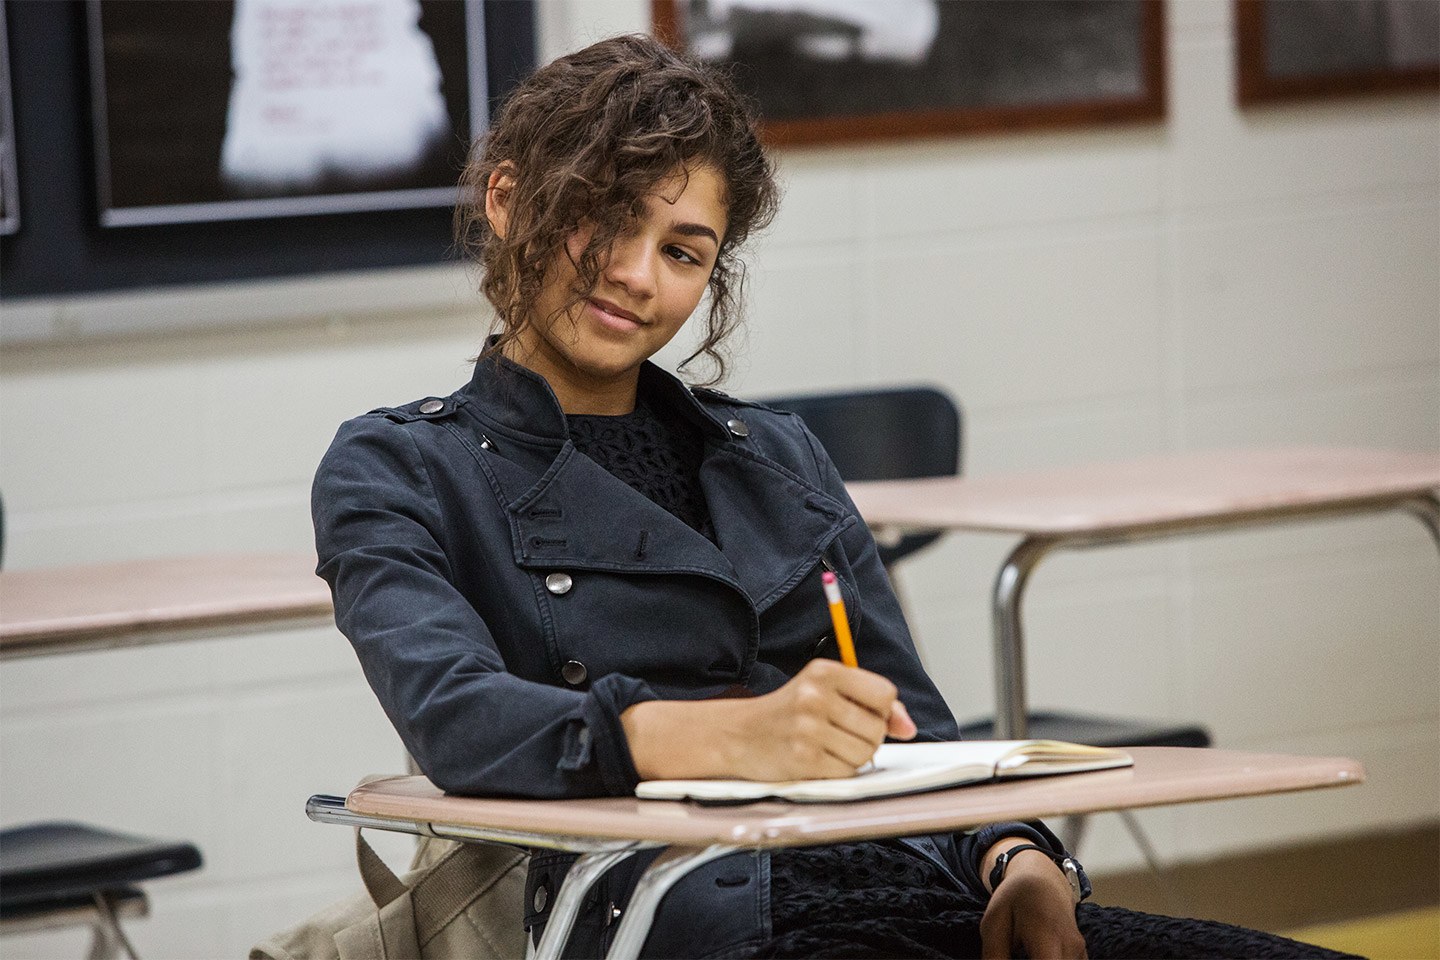 Zendaya Reveals That She Aims for Roles That Are Written for White Women